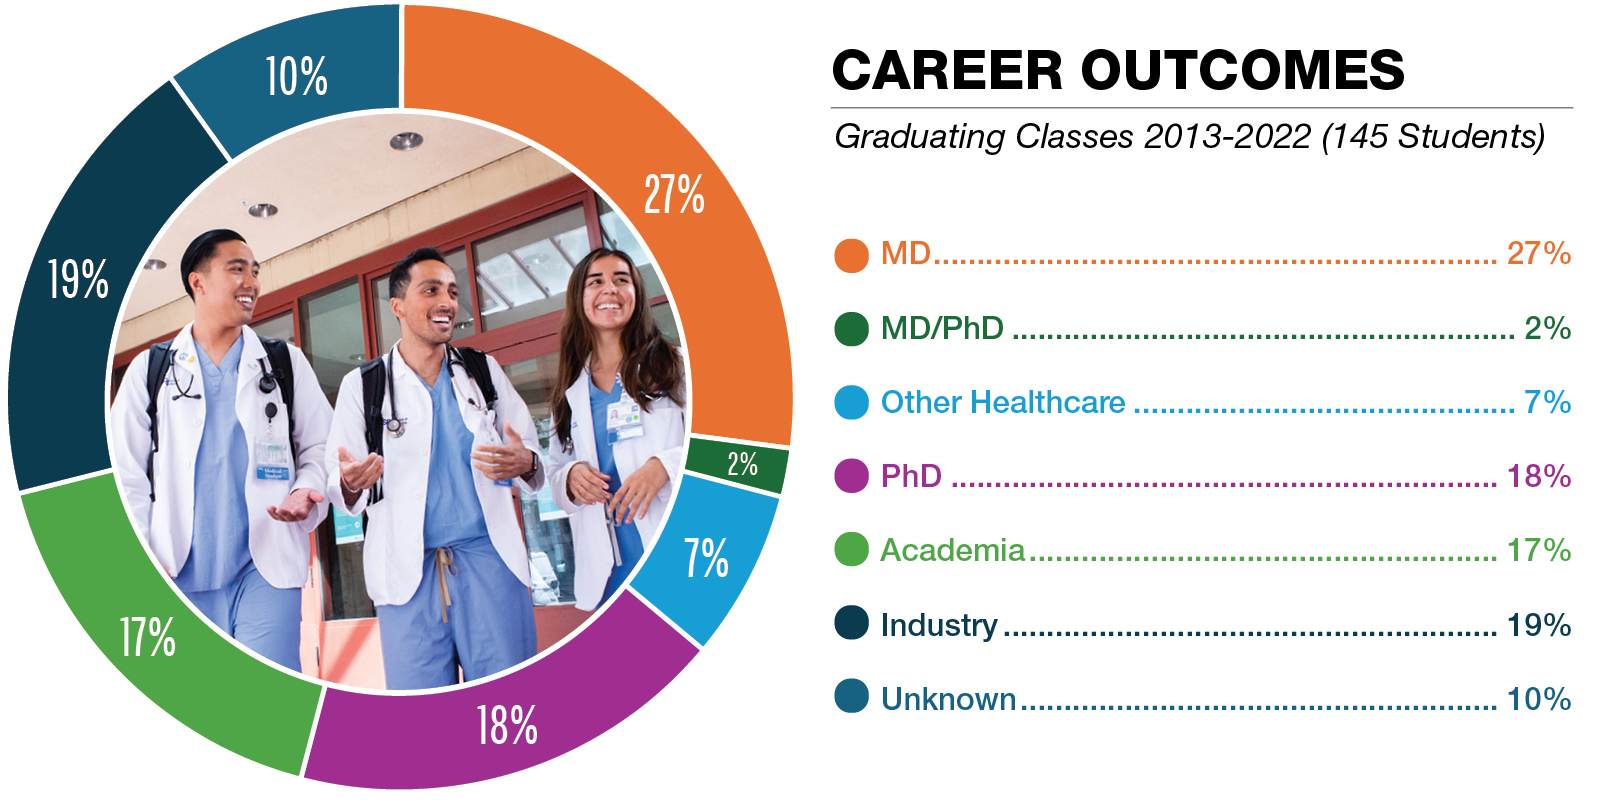 Career Outcomes: Graduating Classes 2013-2022 (145 Students)